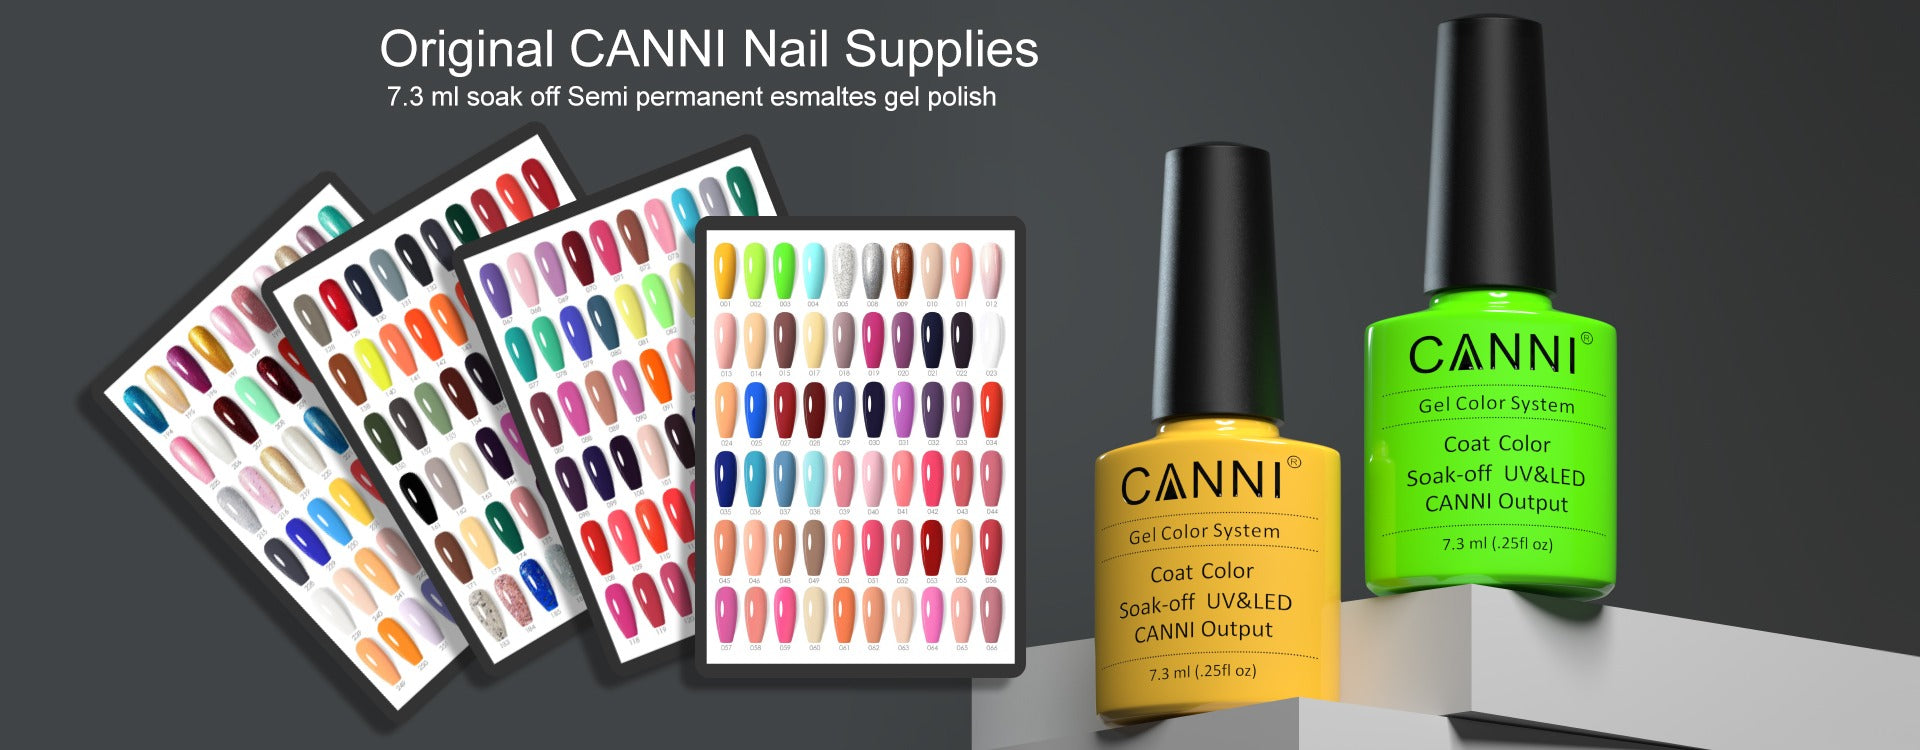 Coco Bean Nail Polish in Latur - Dealers, Manufacturers & Suppliers -  Justdial